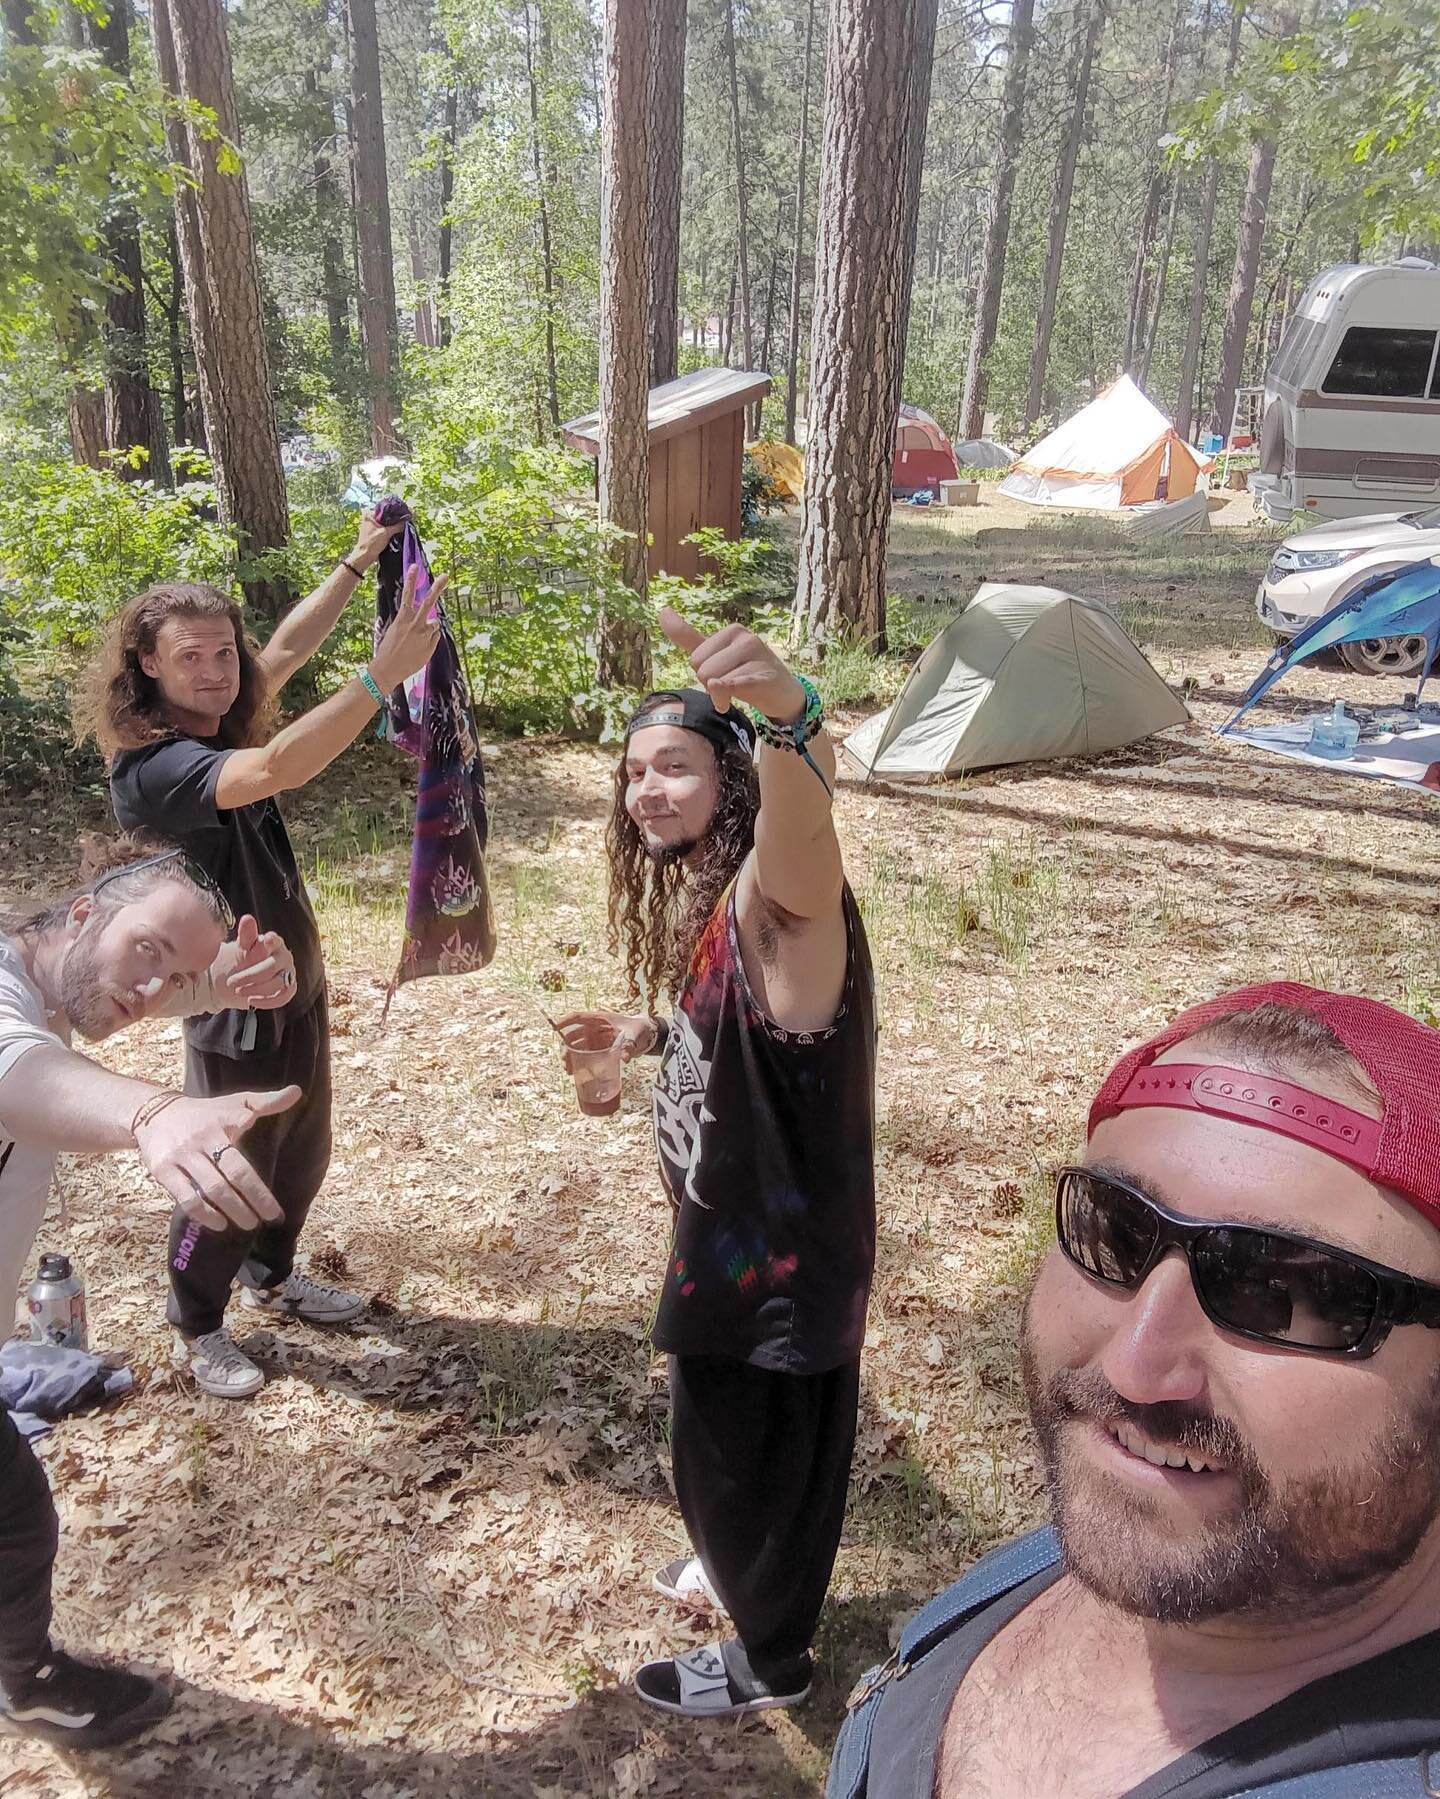 My favorite part of High Vibe Fest - getting to kick it in some of the most beautiful nature with some of the dopest most genuine souls in my life, old and new. We&rsquo;re out here building a legacy and I&rsquo;m so stoked for the future ✨🚀🌊

Shou